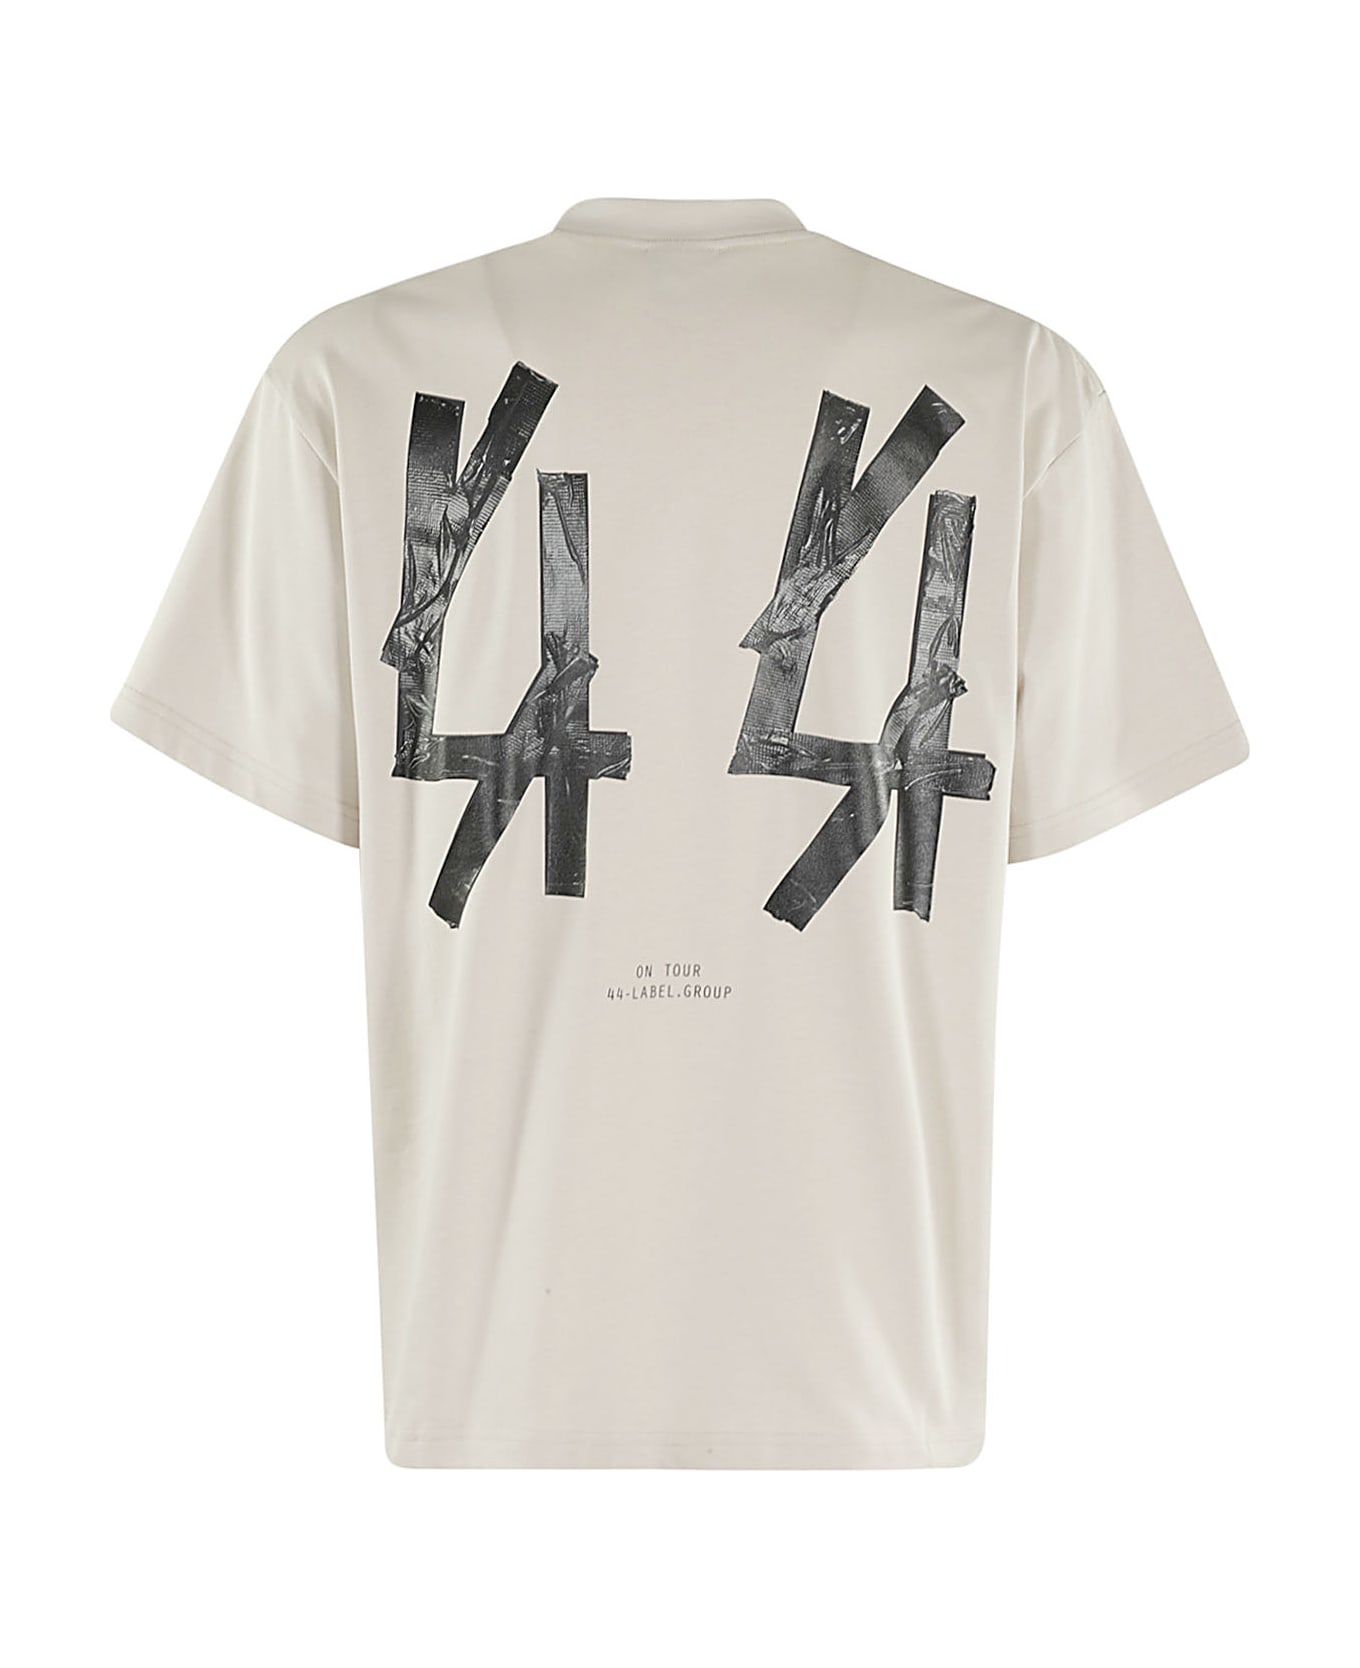 44 Label Group Classic Tee シャツ